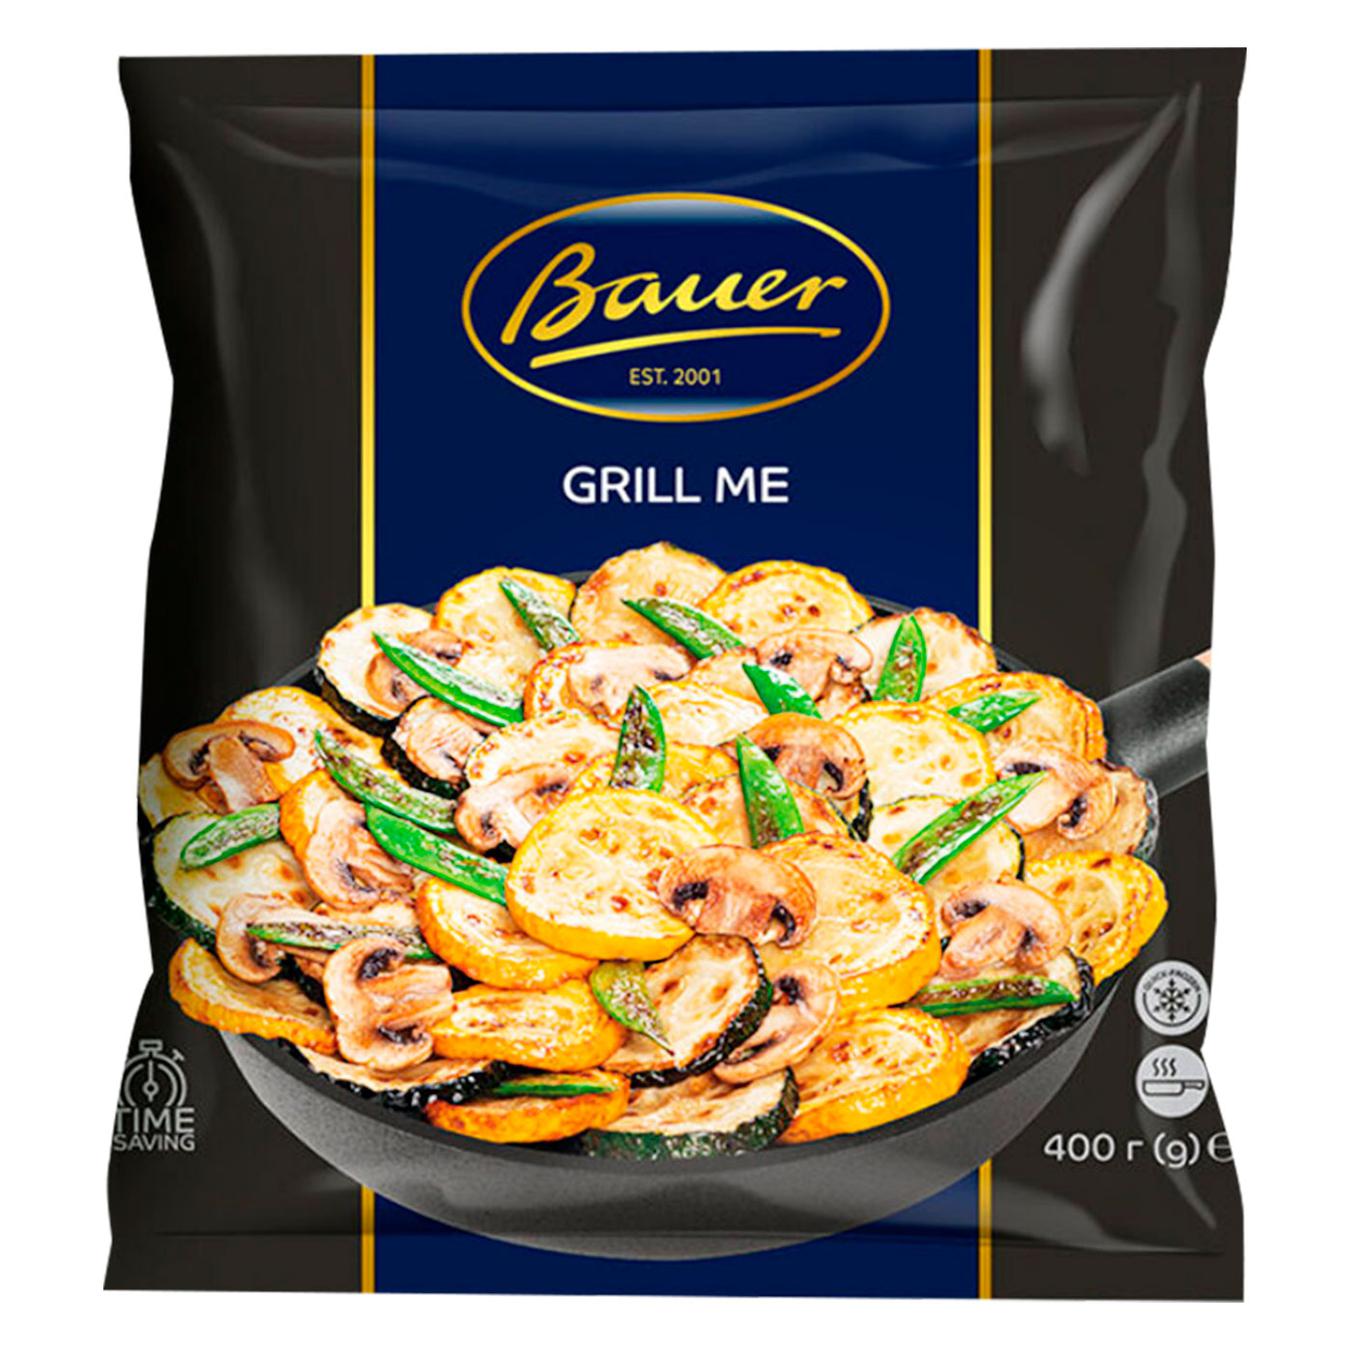 Grill me Bauer Vegetable mix 400g